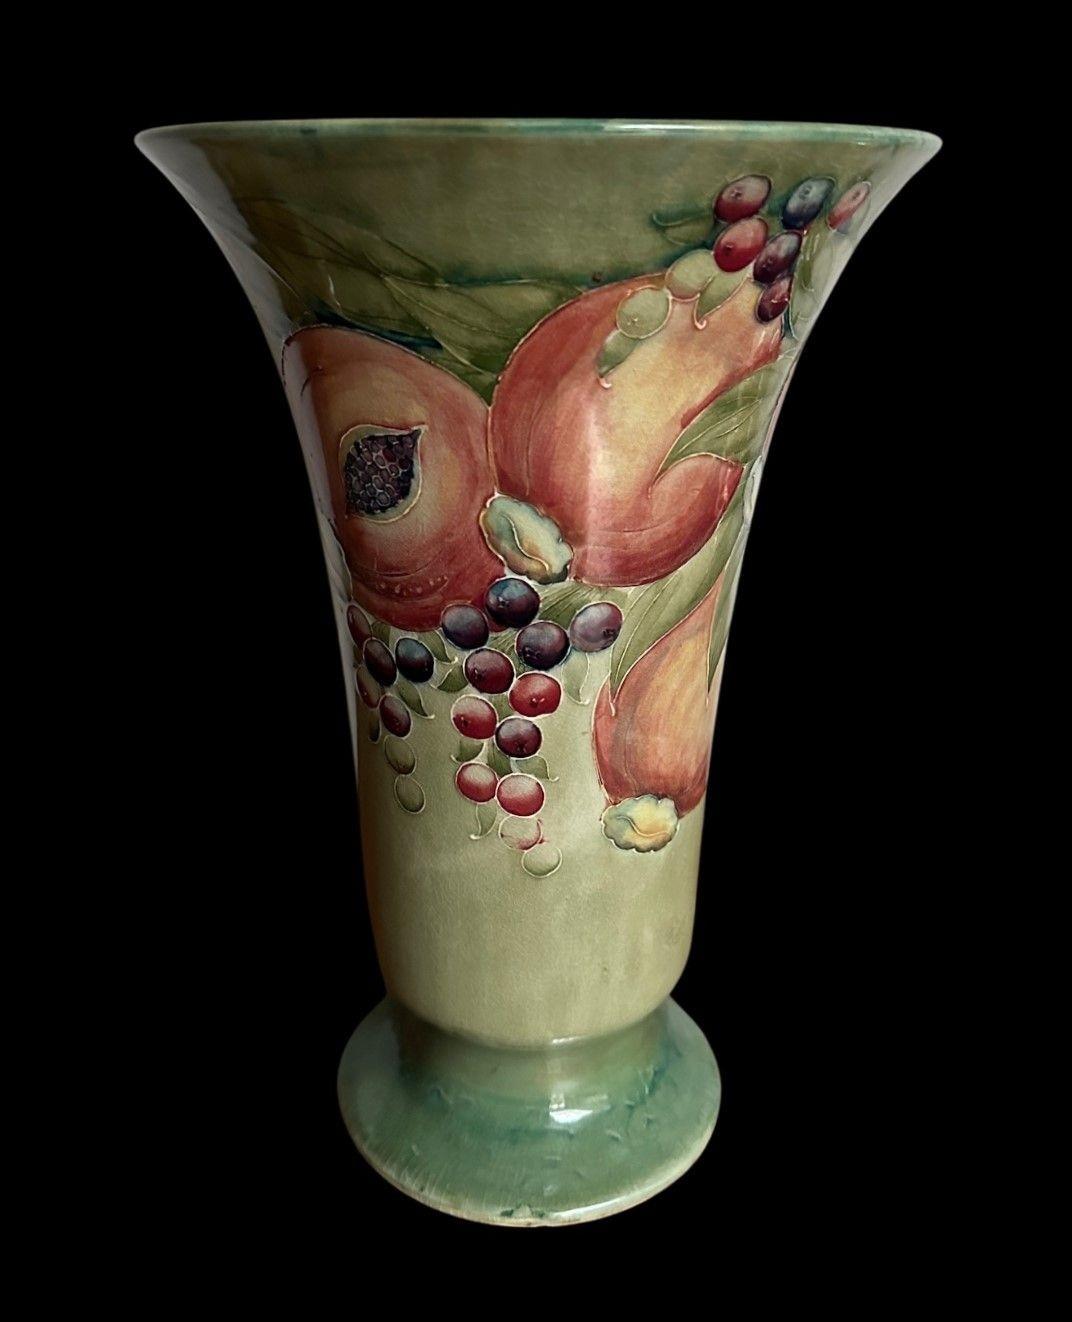 5474
A Large and Early William Moorcroft Footed Vase decorated in the Pomegranate design on a Scarce Caledon Green Ground.
Typical Crazing and a minute nick to the footrim
Circa 1912
30cm high, 20.5cm wide